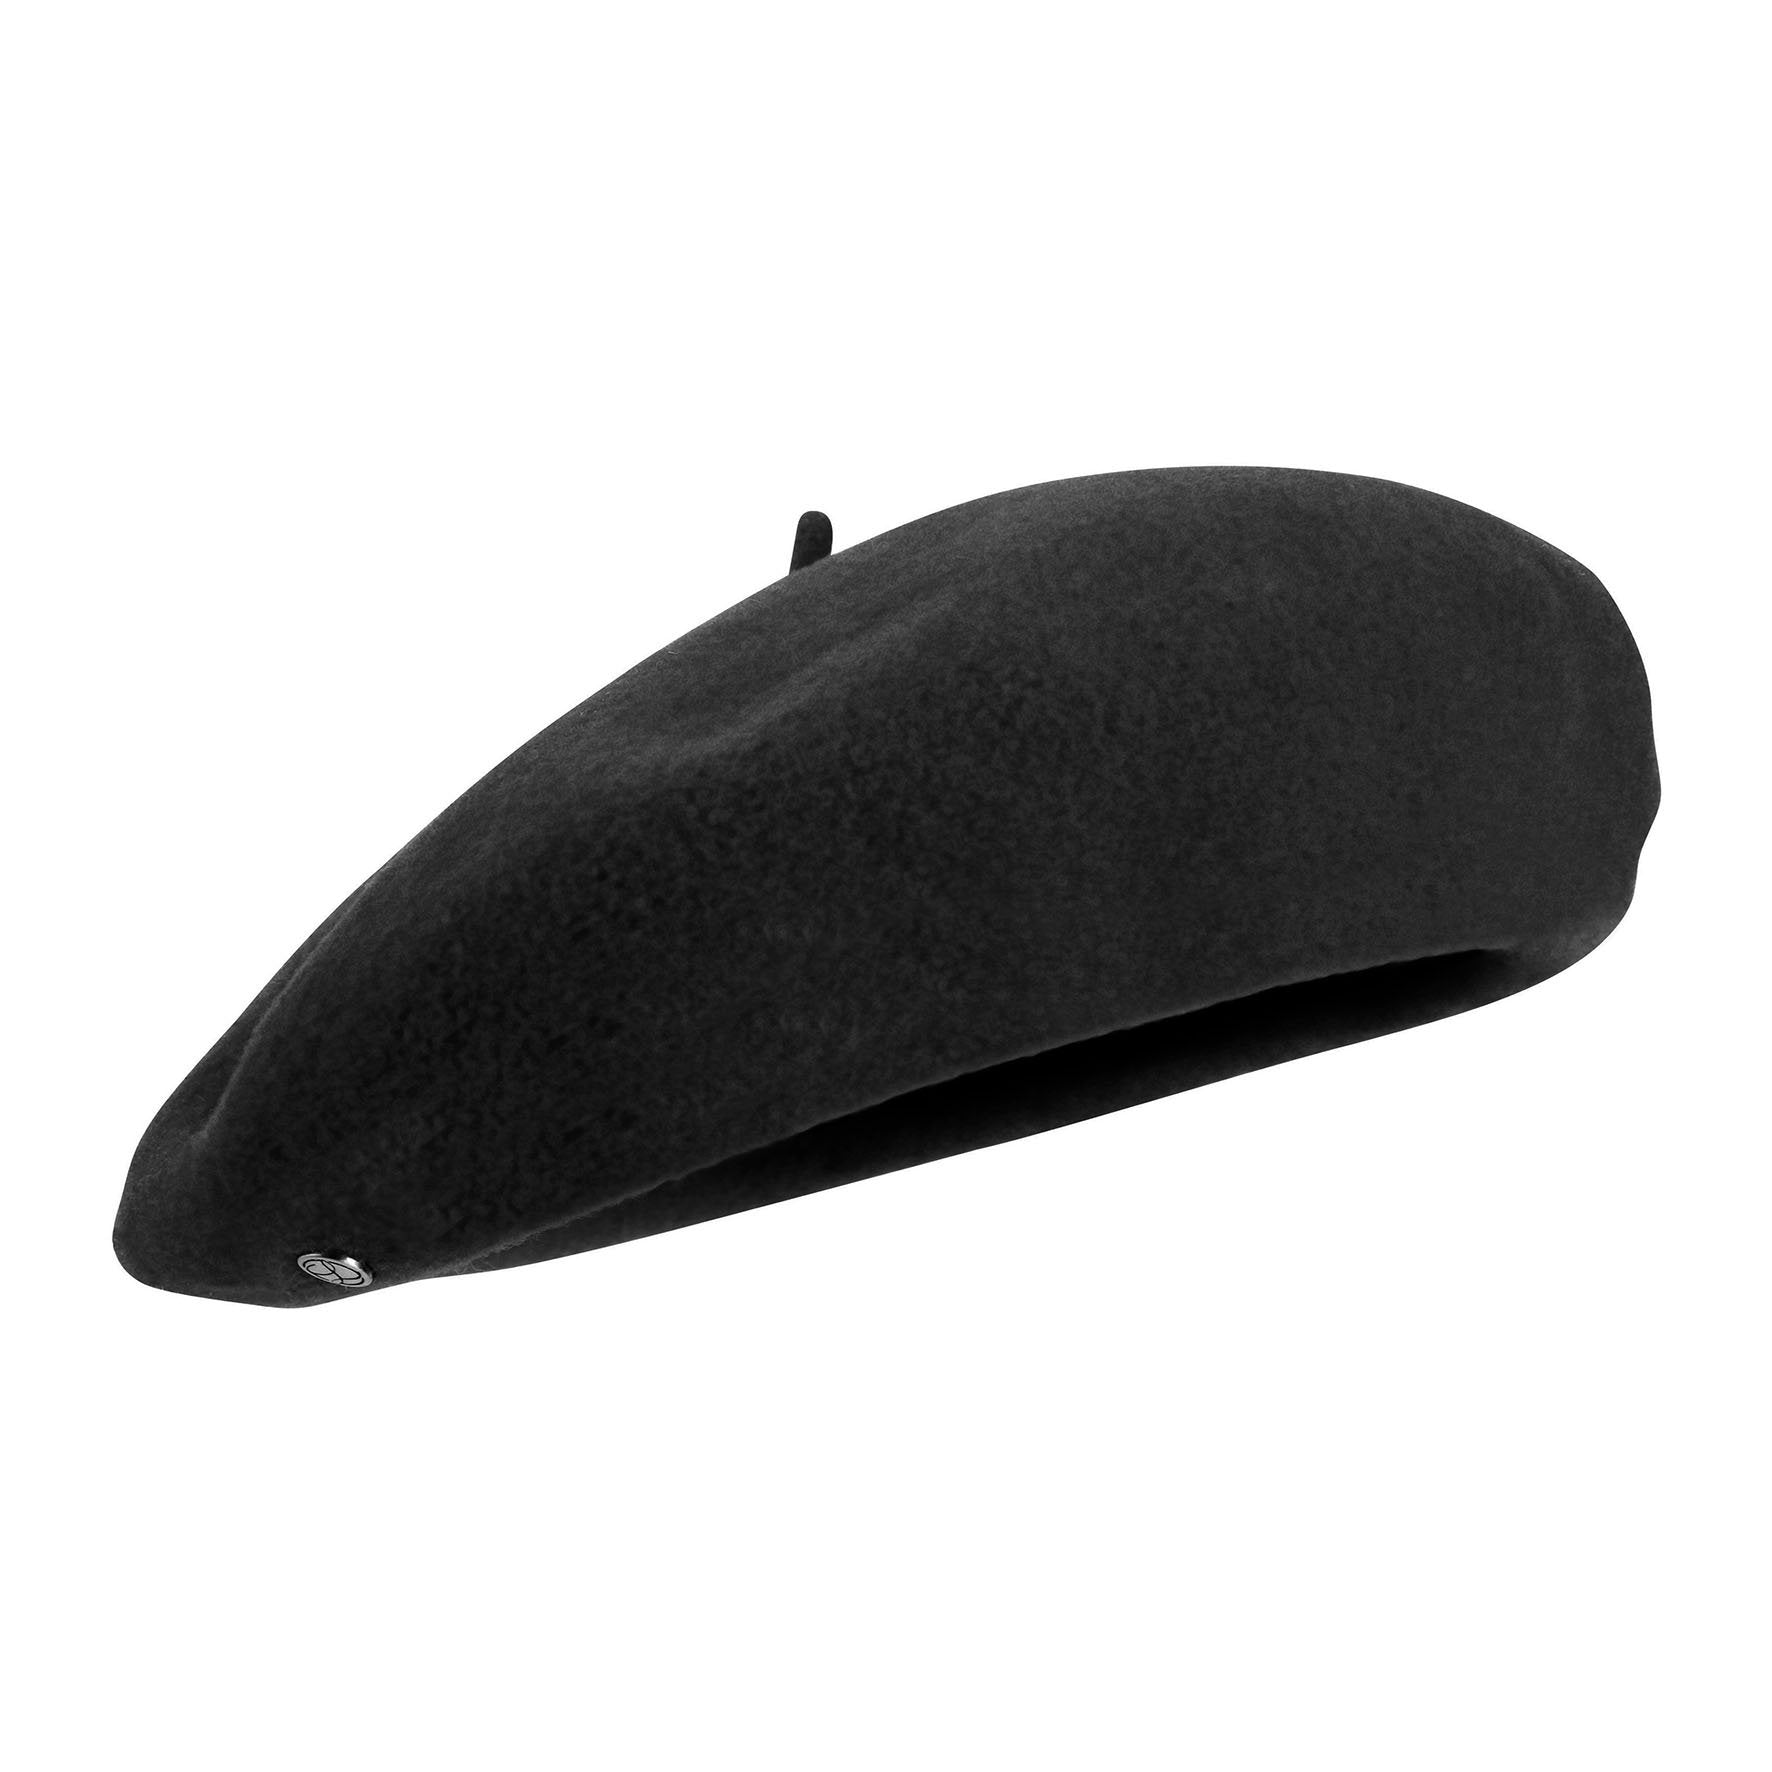 Heritage by Laulhere | Authentic French Beret | Noir | Black Merino Wool Beret | buy now at The Cashmere Choice London